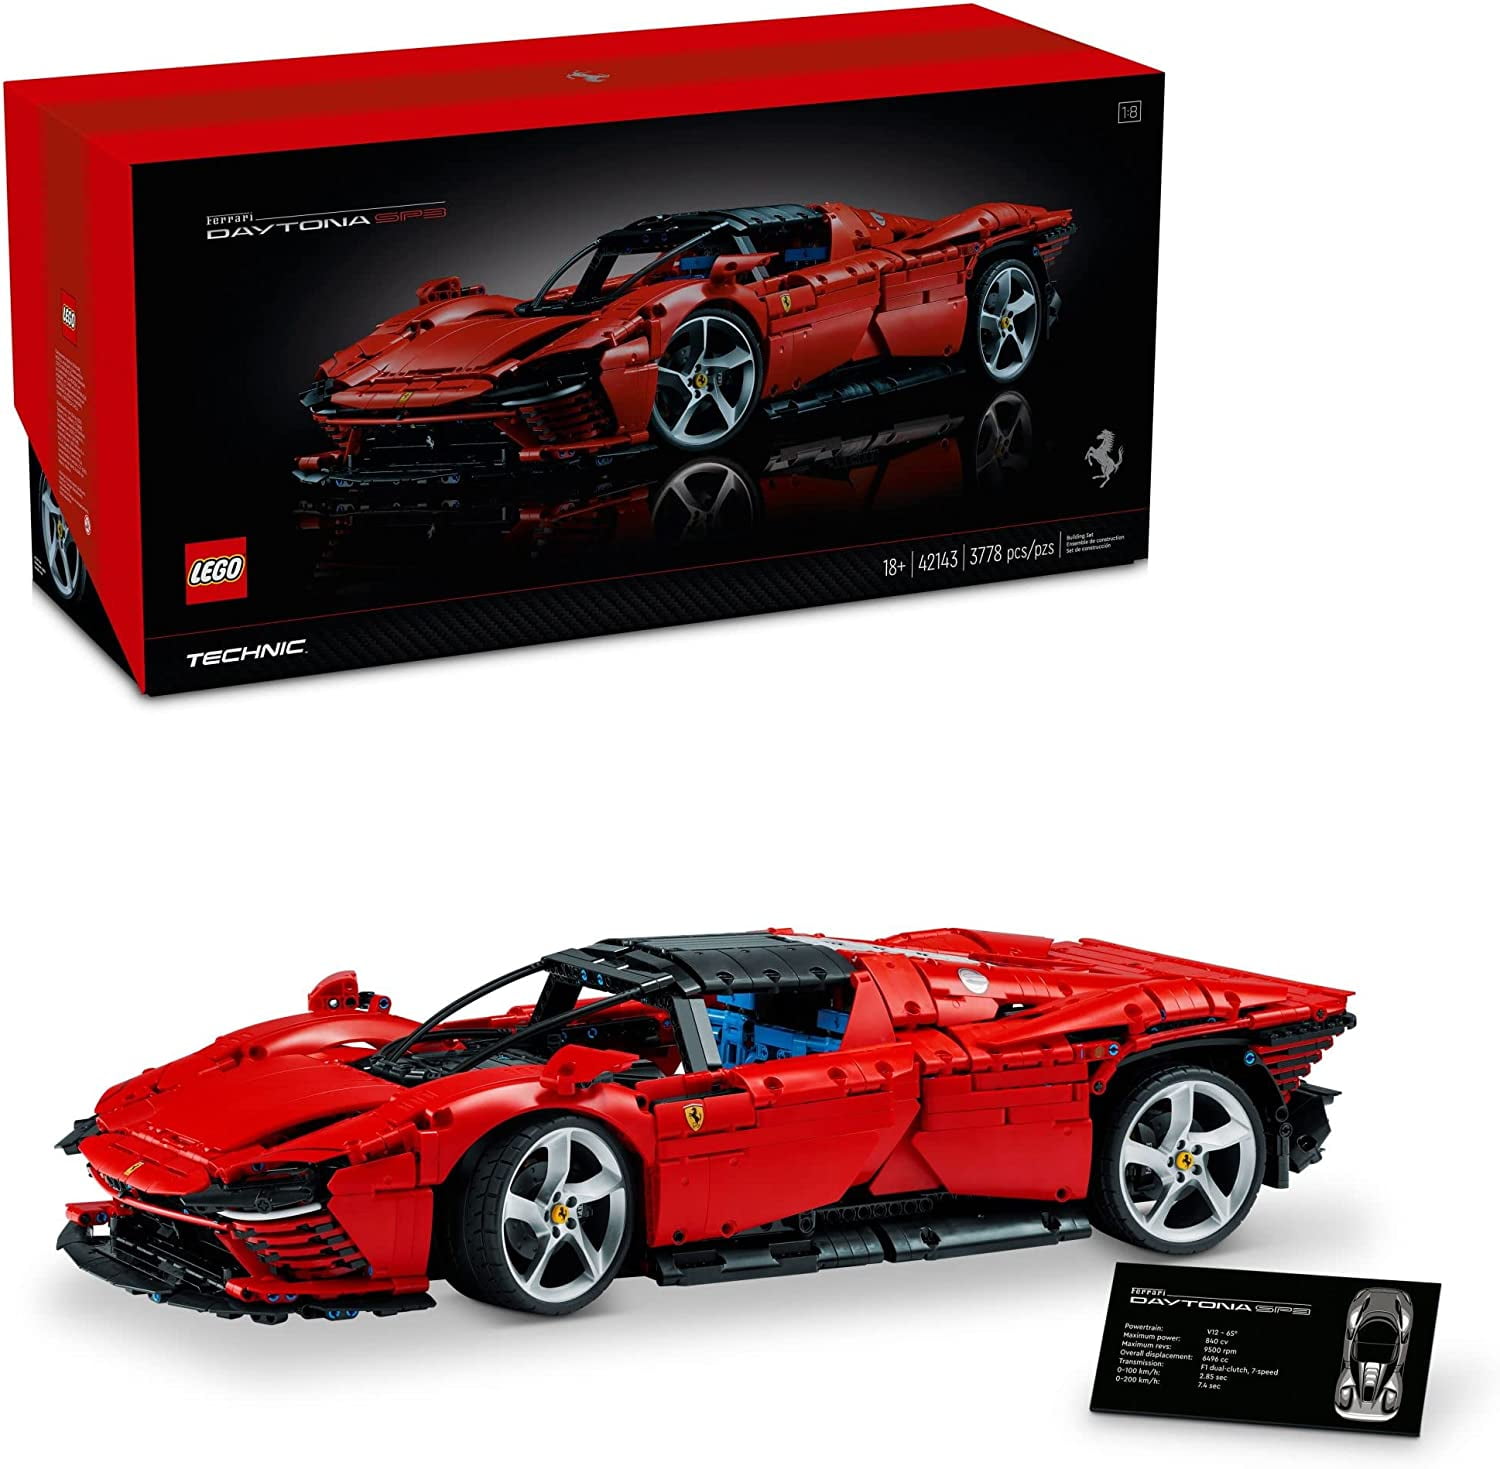 If you can't afford a real Lamborghini, this Lego Technic set is the next  best thing - Entertainment